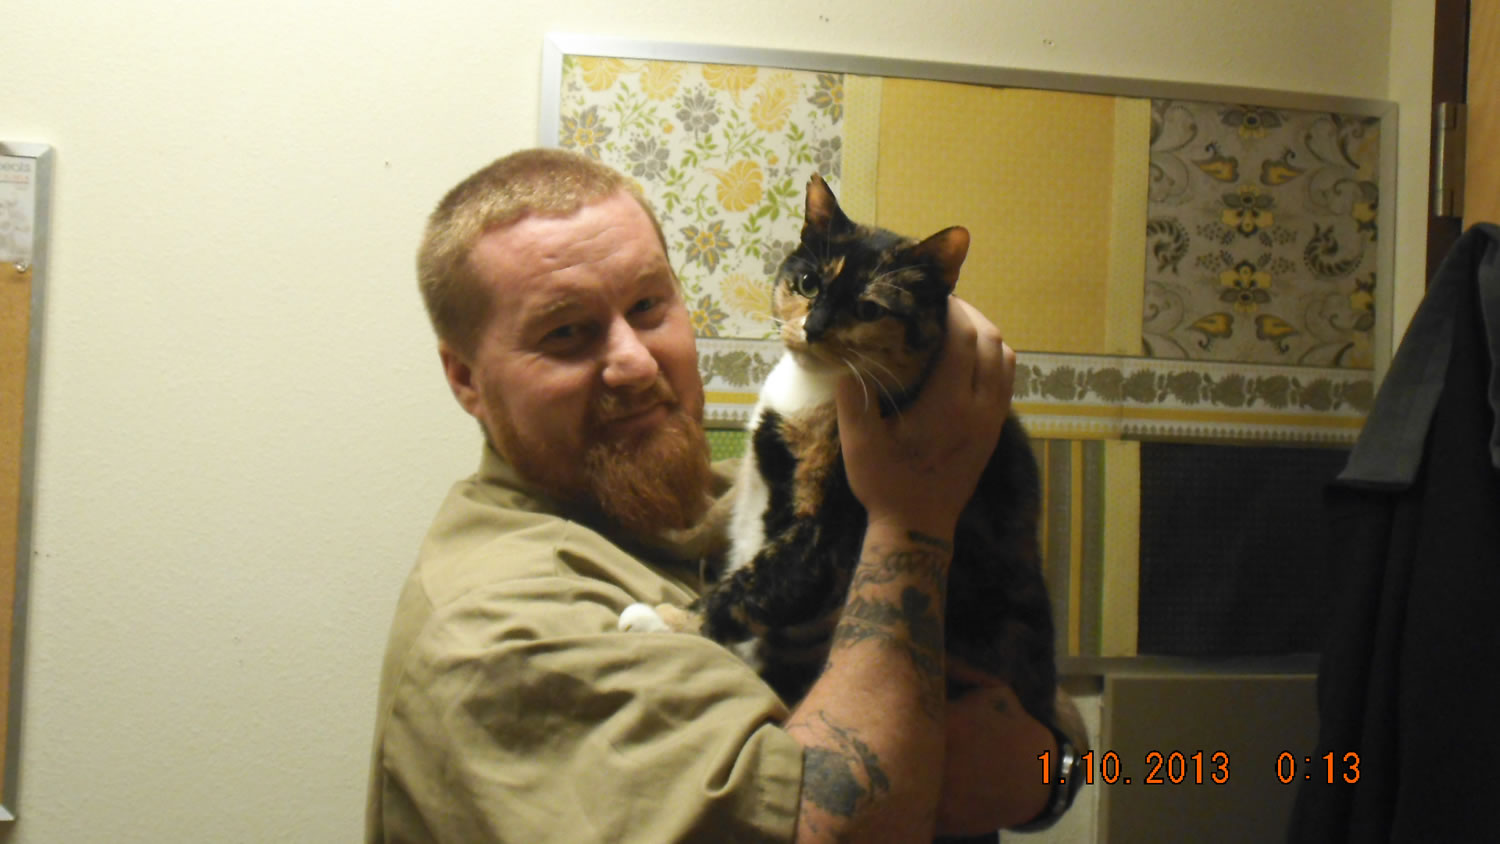 Photo courtesy of Larch Corrections Center
James Resop, an inmate at Larch Corrections Center, in Yacolt, is among the handlers in a cat adoption program. The effort, which started in 2012, involves volunteers training the offenders to care for the cats. After the cats are trained and socialized, they are placed for adoption.